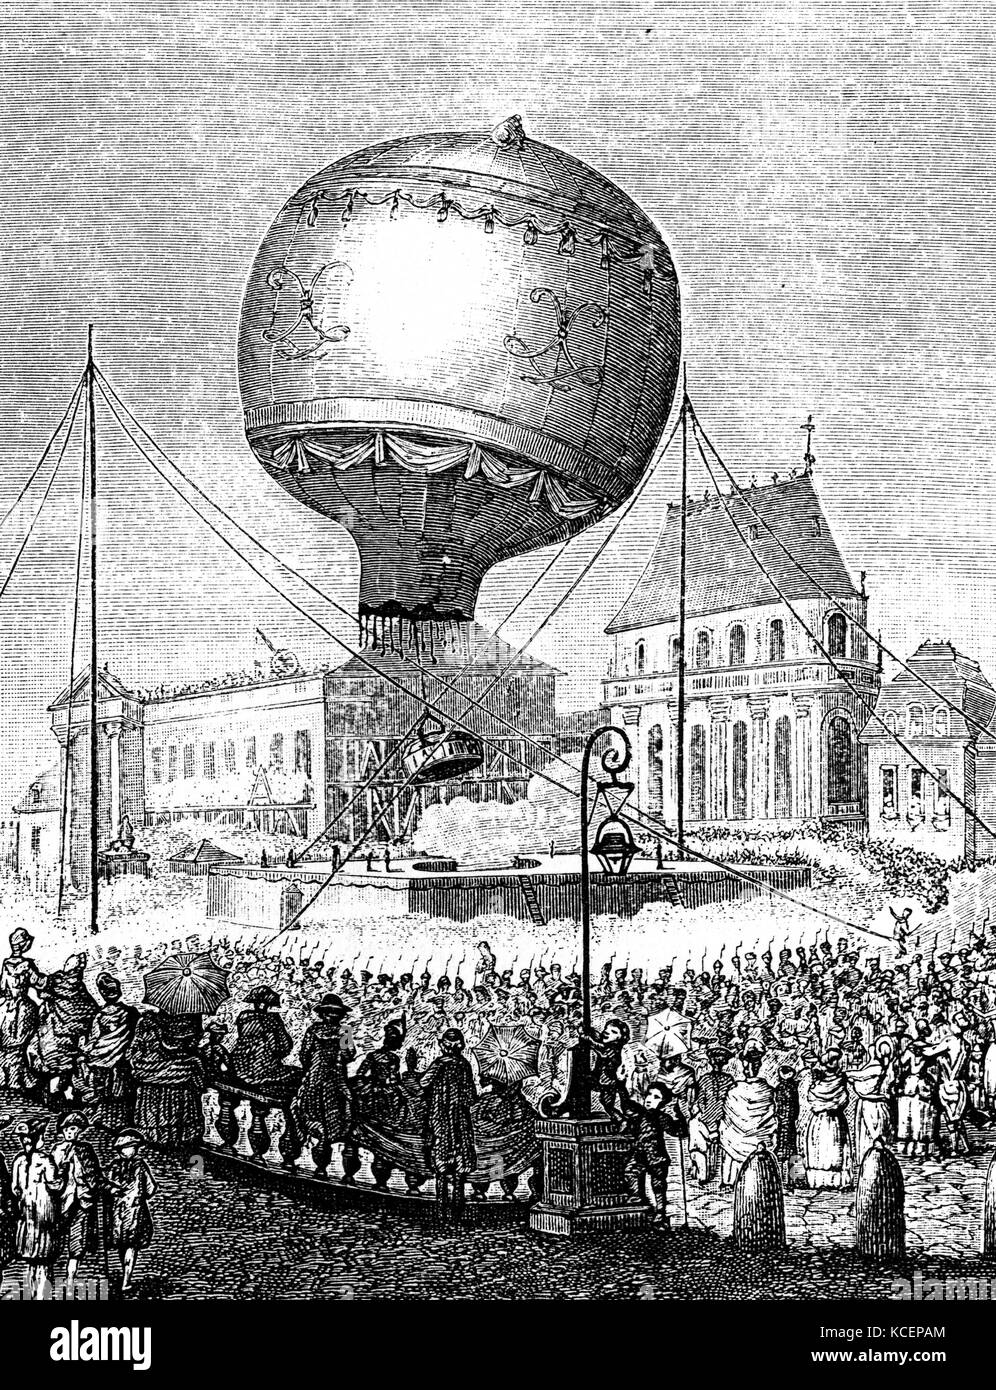 Copperplate engraving of the Hydrogen Balloon designed by the Montgolfier Brothers. Joseph-Michel Montgolfier (1740-1810) and Jacques-Étienne Montgolfier (1745-1799) inventors of the Montgolfier-style hot air balloon, globe aérostatique. Dated 18th Century Stock Photo